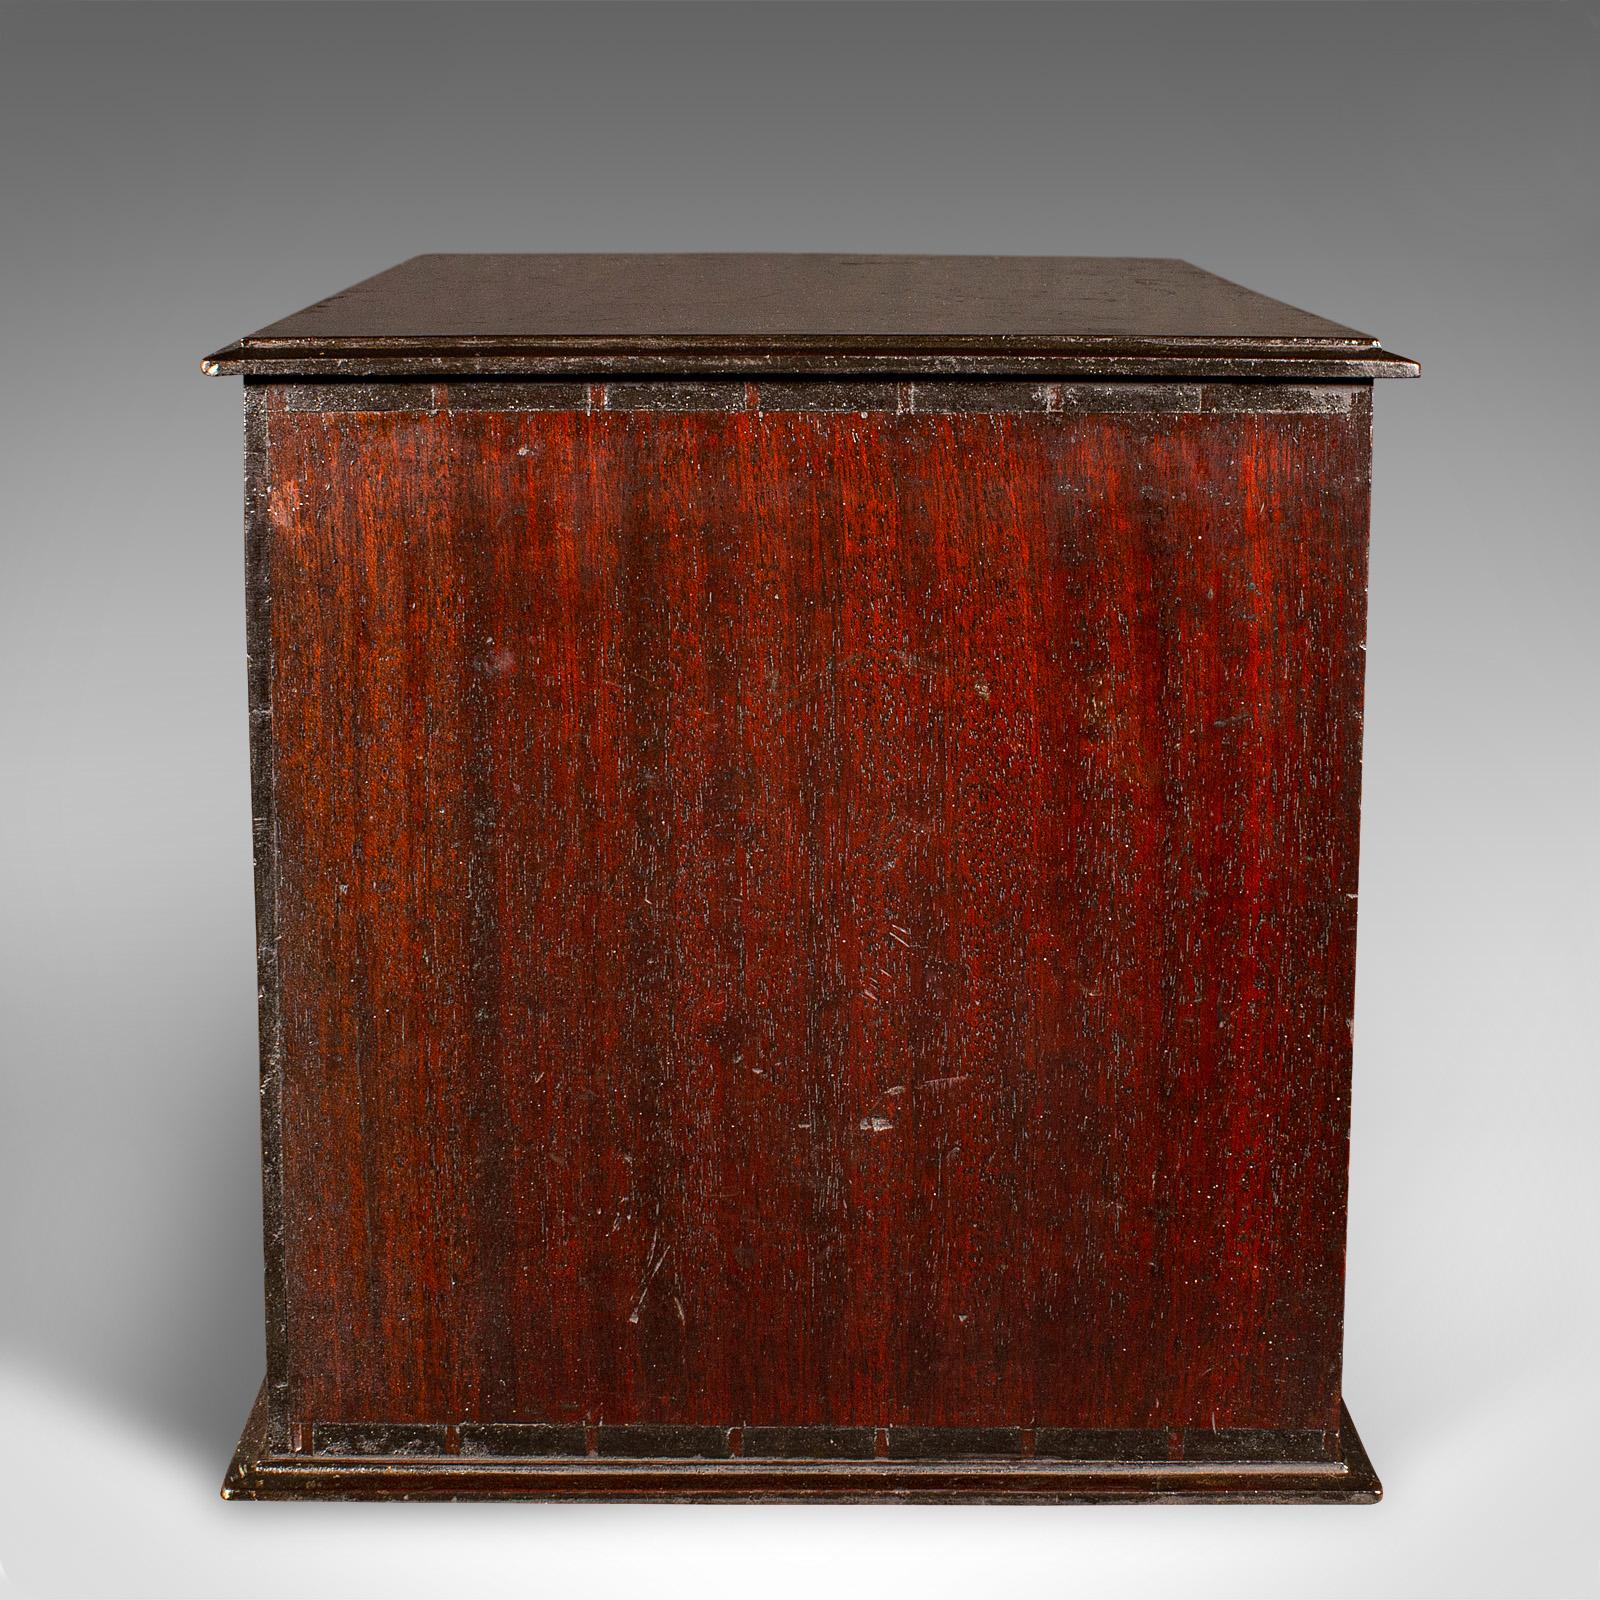 High Victorian Antique Watchmaker's Cabinet, English, Tabletop Work Chest, Victorian, C.1860 For Sale